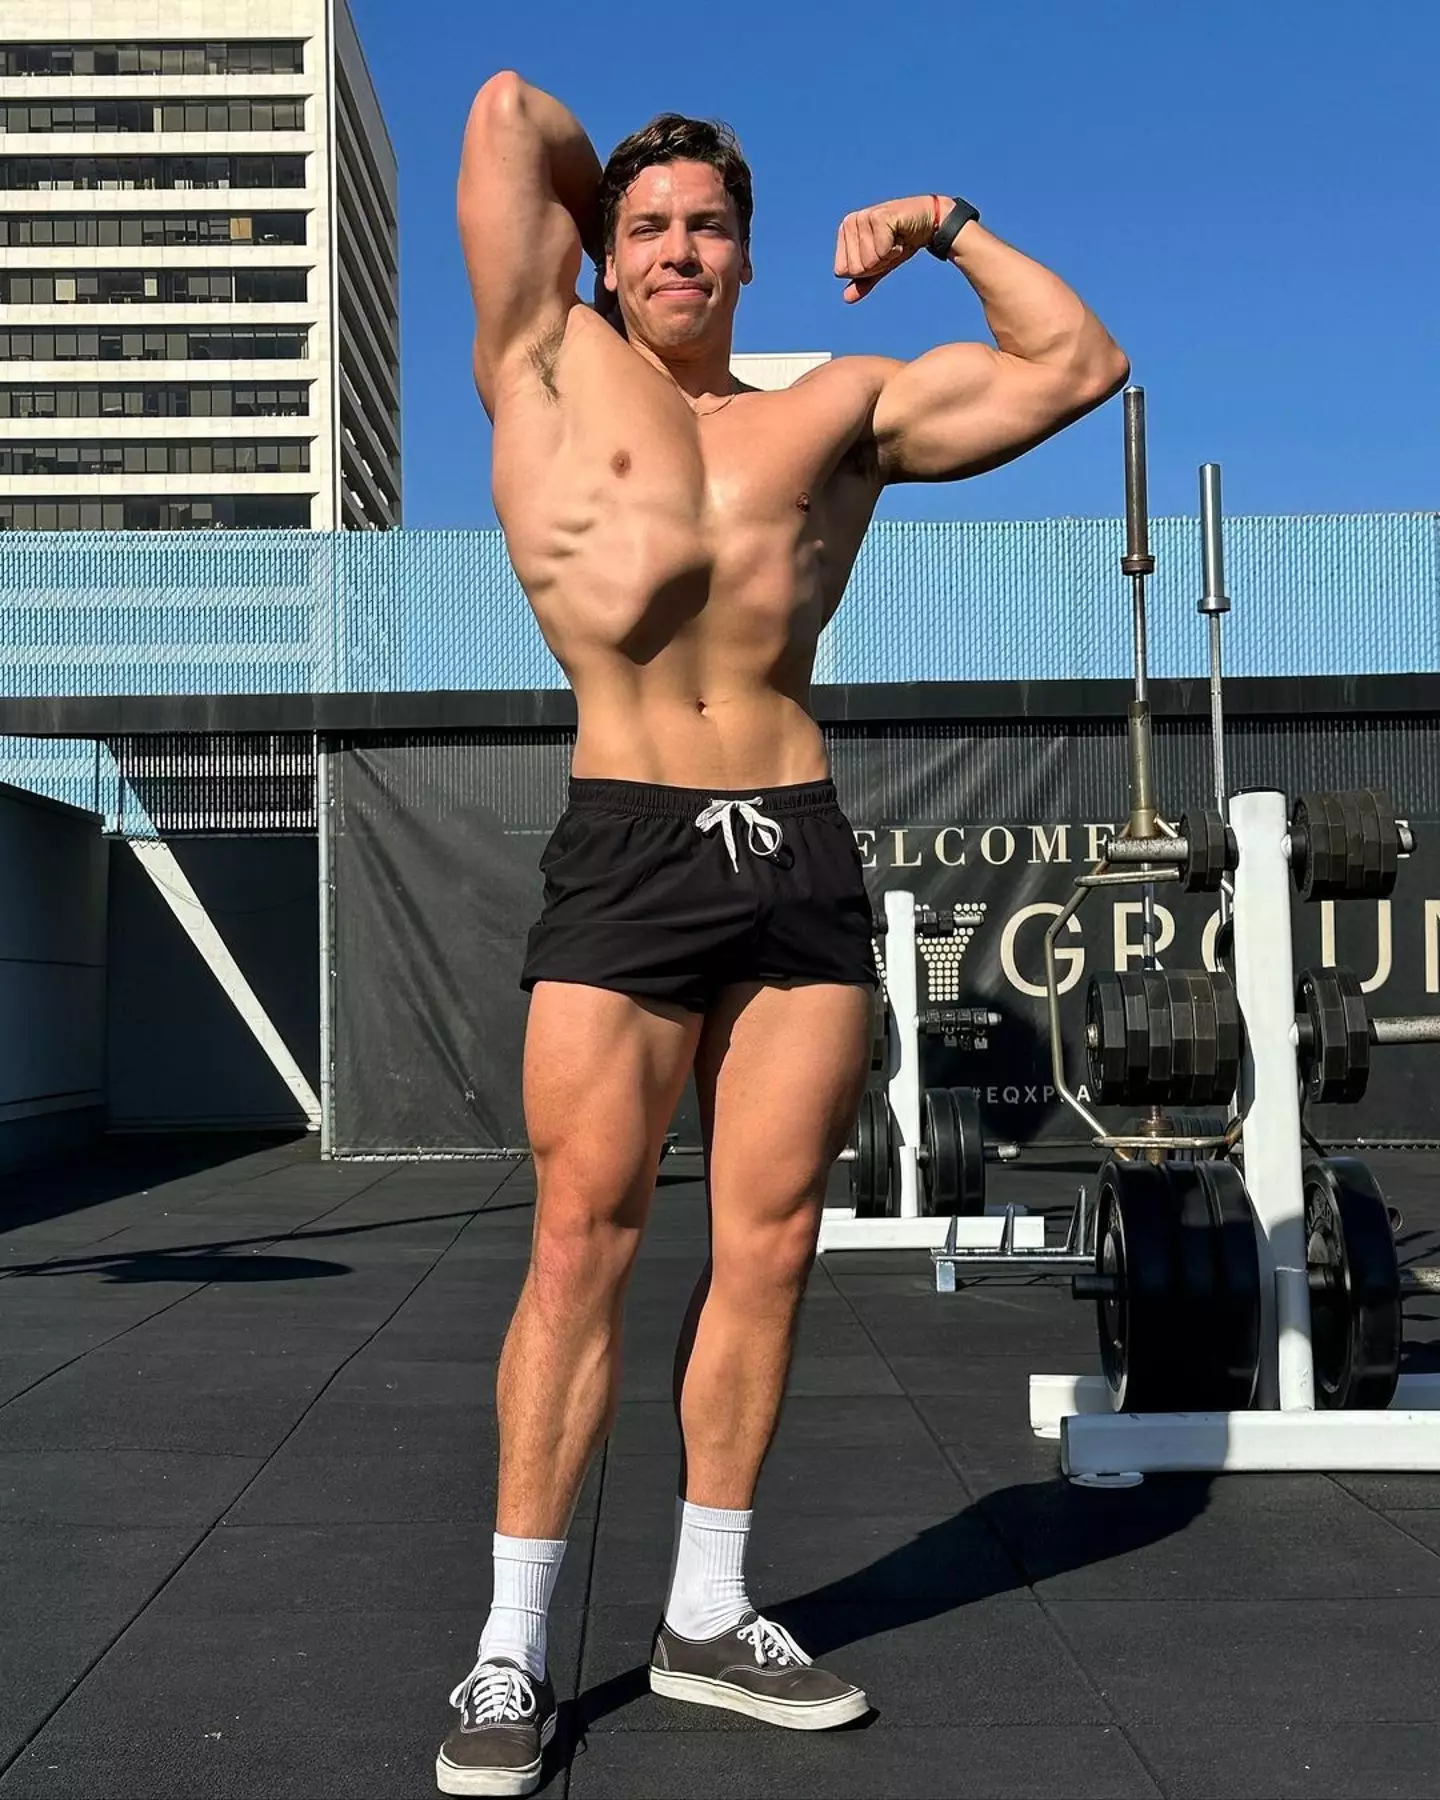 Joseph Baena is clearly following in his father Arnold Schwarzenegger's footsteps after showing off his bulky physique on Insta.